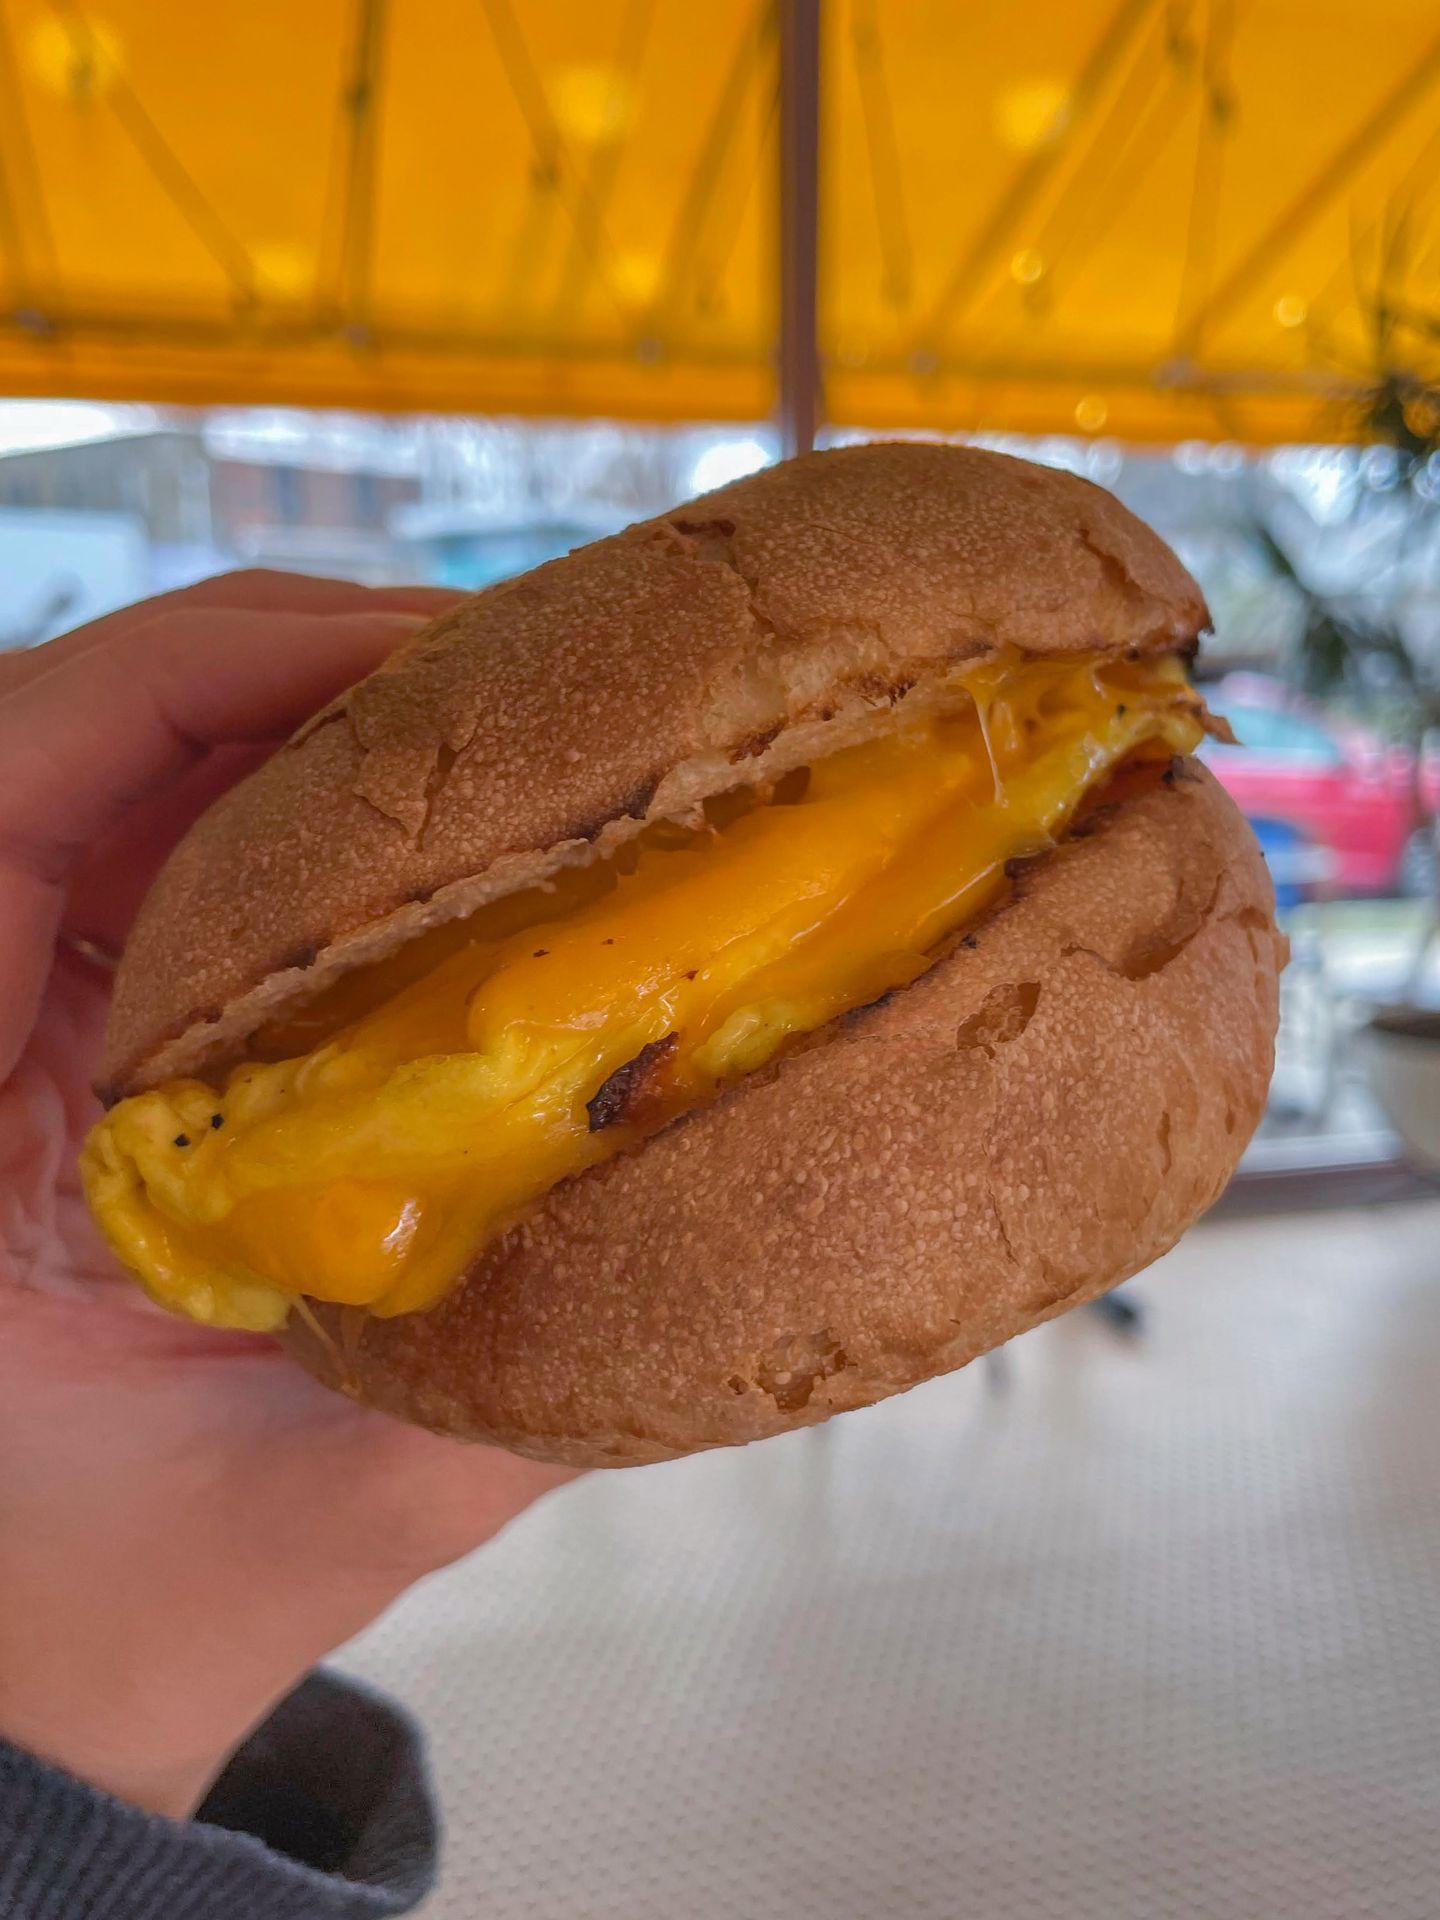 A breakfast sandwich made with a fluffy roll and filled with egg and melted cheese.